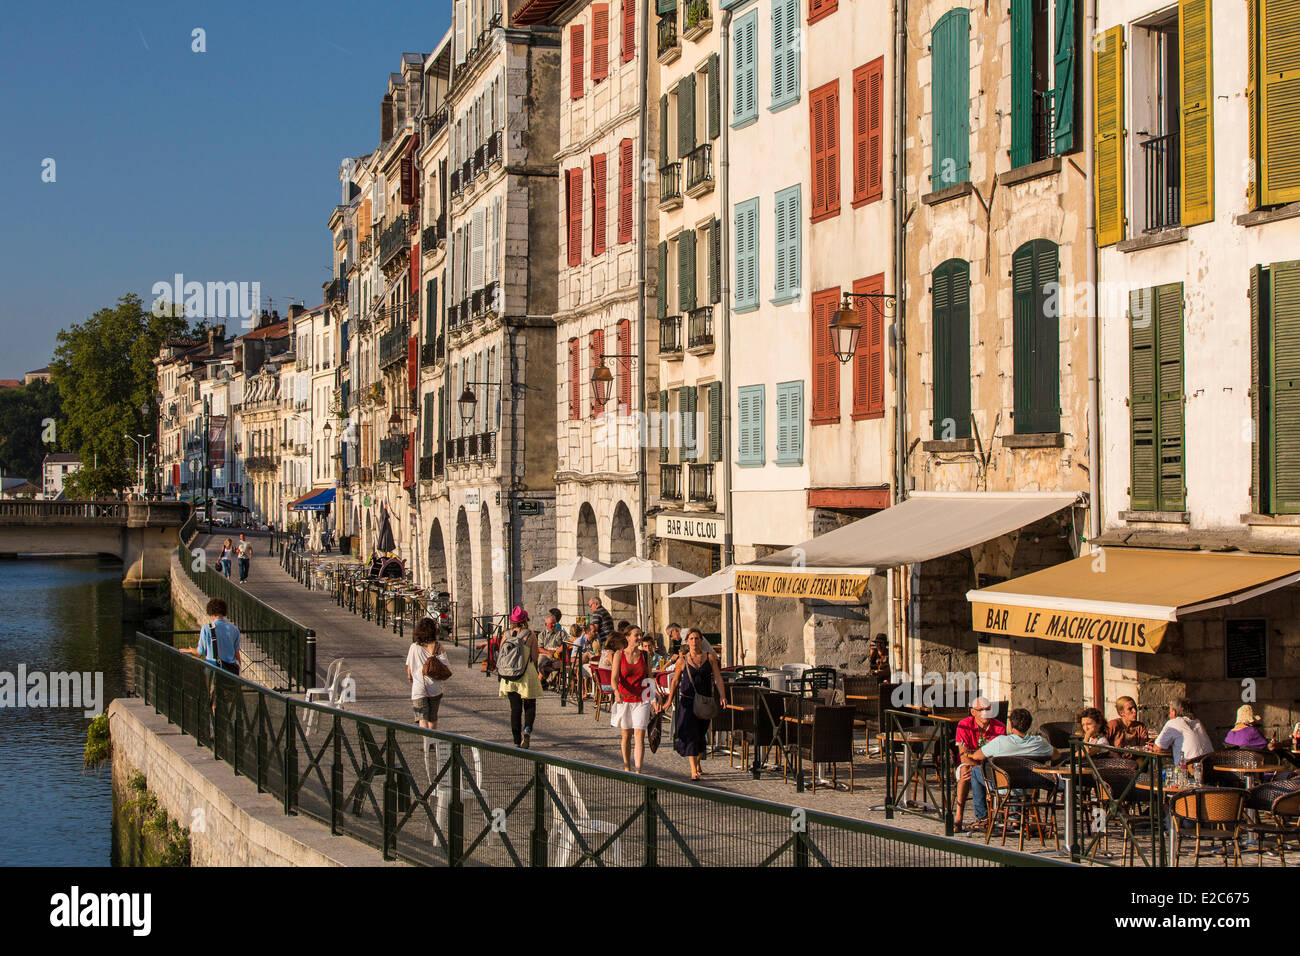 France, Pyrenees Atlantiques, Bayonne, quay of Corsaires, traditional architecture on Nive river banks Stock Photo